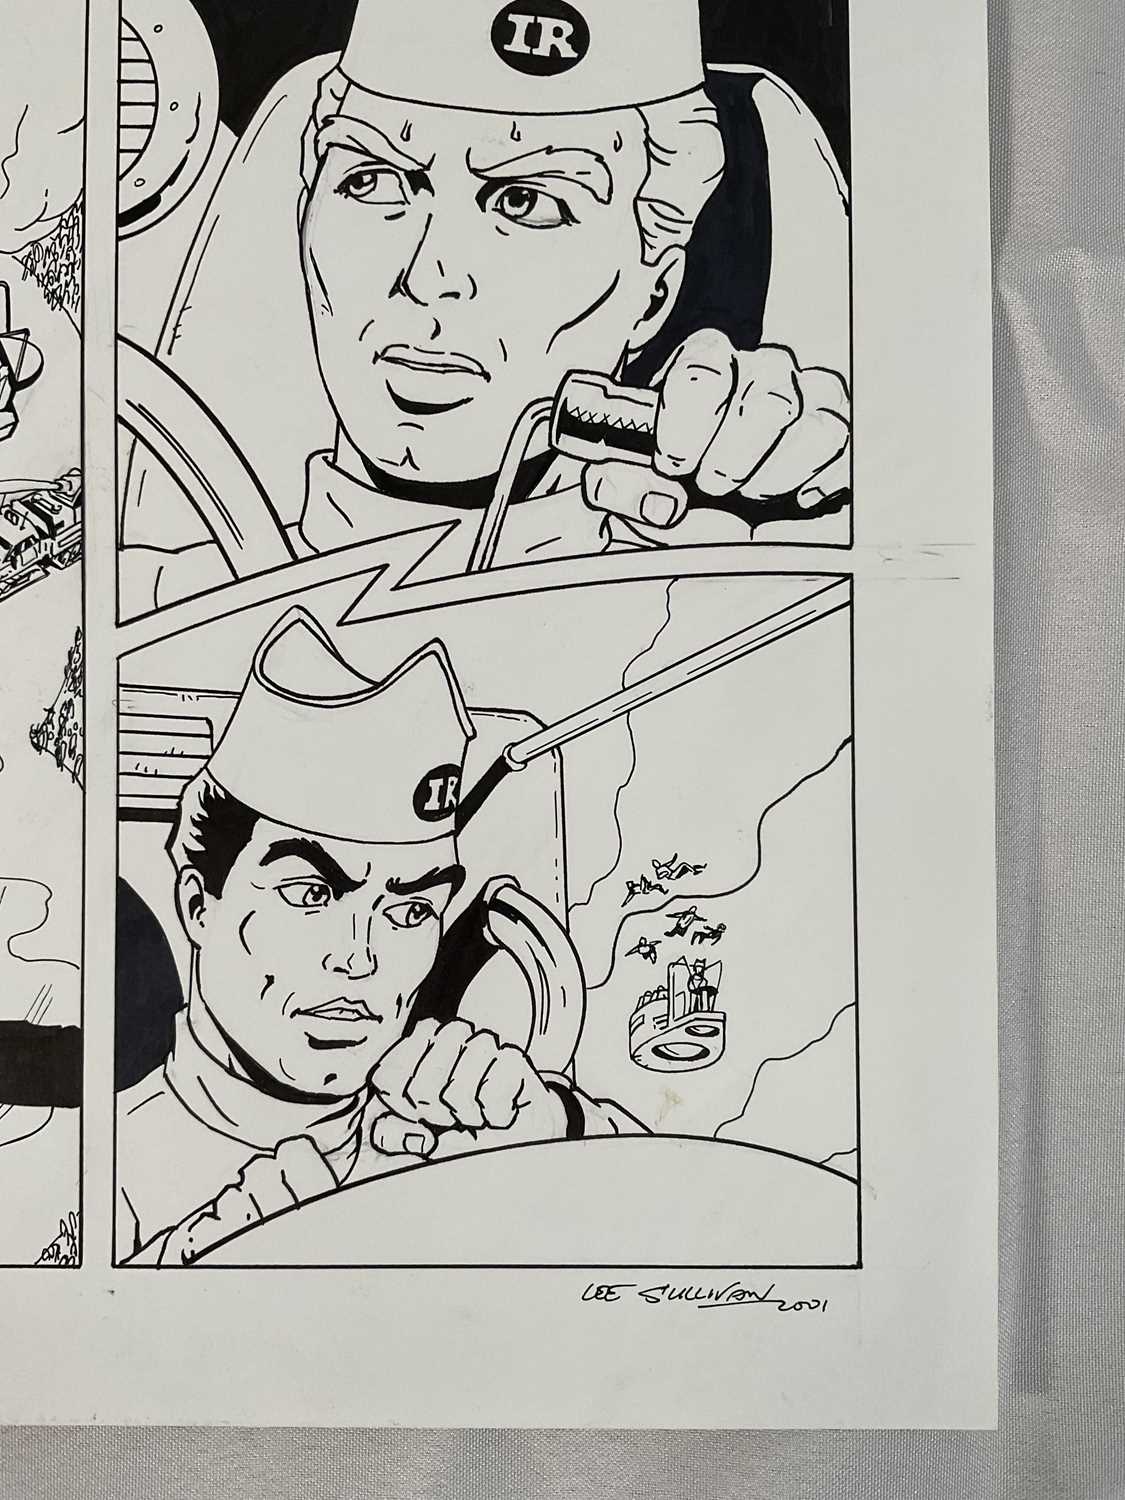 Original Comic Book artwork - Lee Sullivan artwork for an issue of Gerry Anderson's THUNDERBIRDS, c. - Image 2 of 3